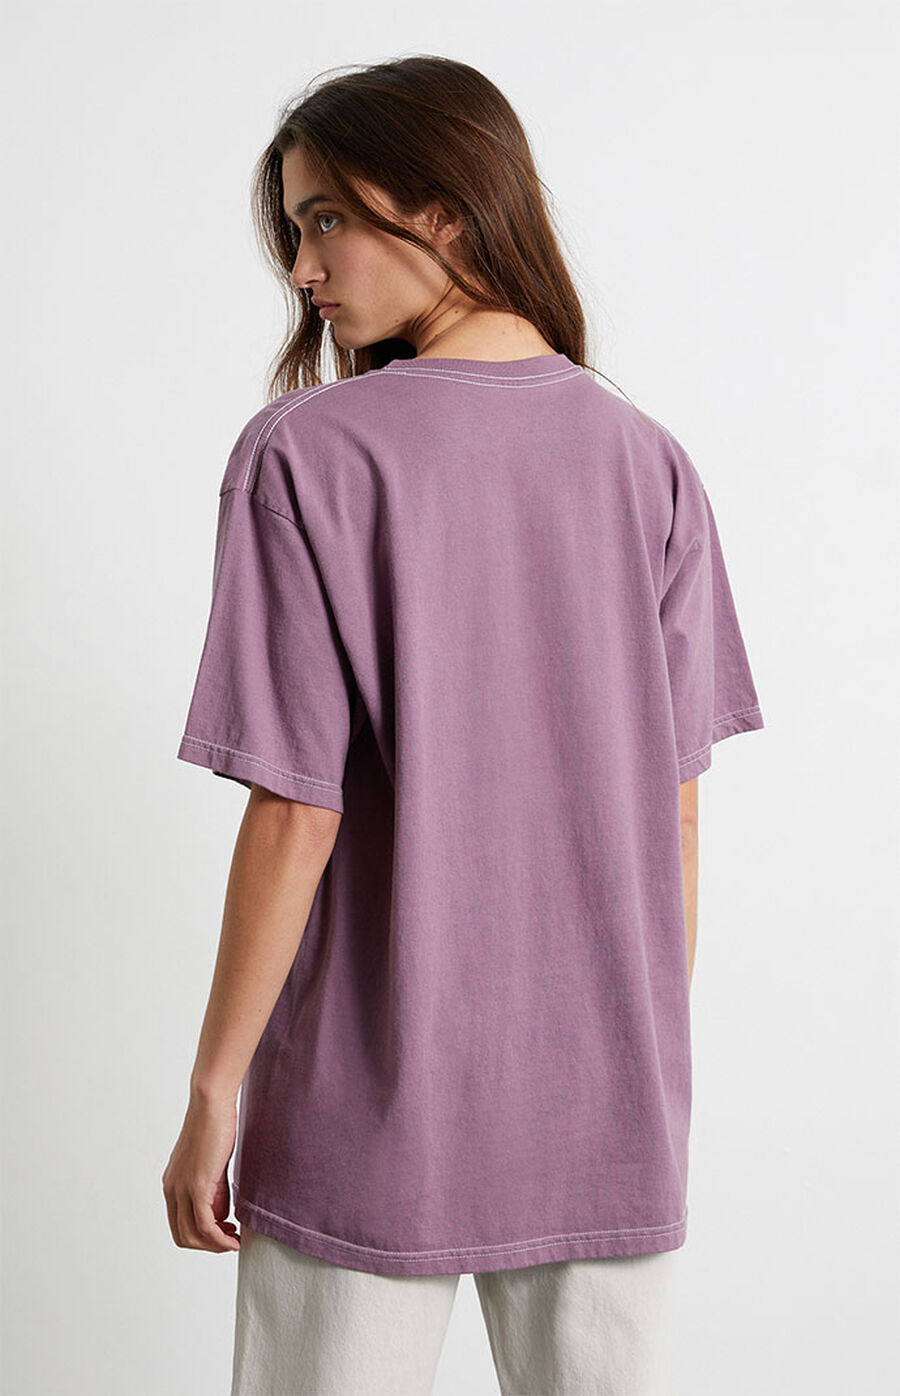 Golden Hour Trust The Timing Oversized T-Shirt | PacSun